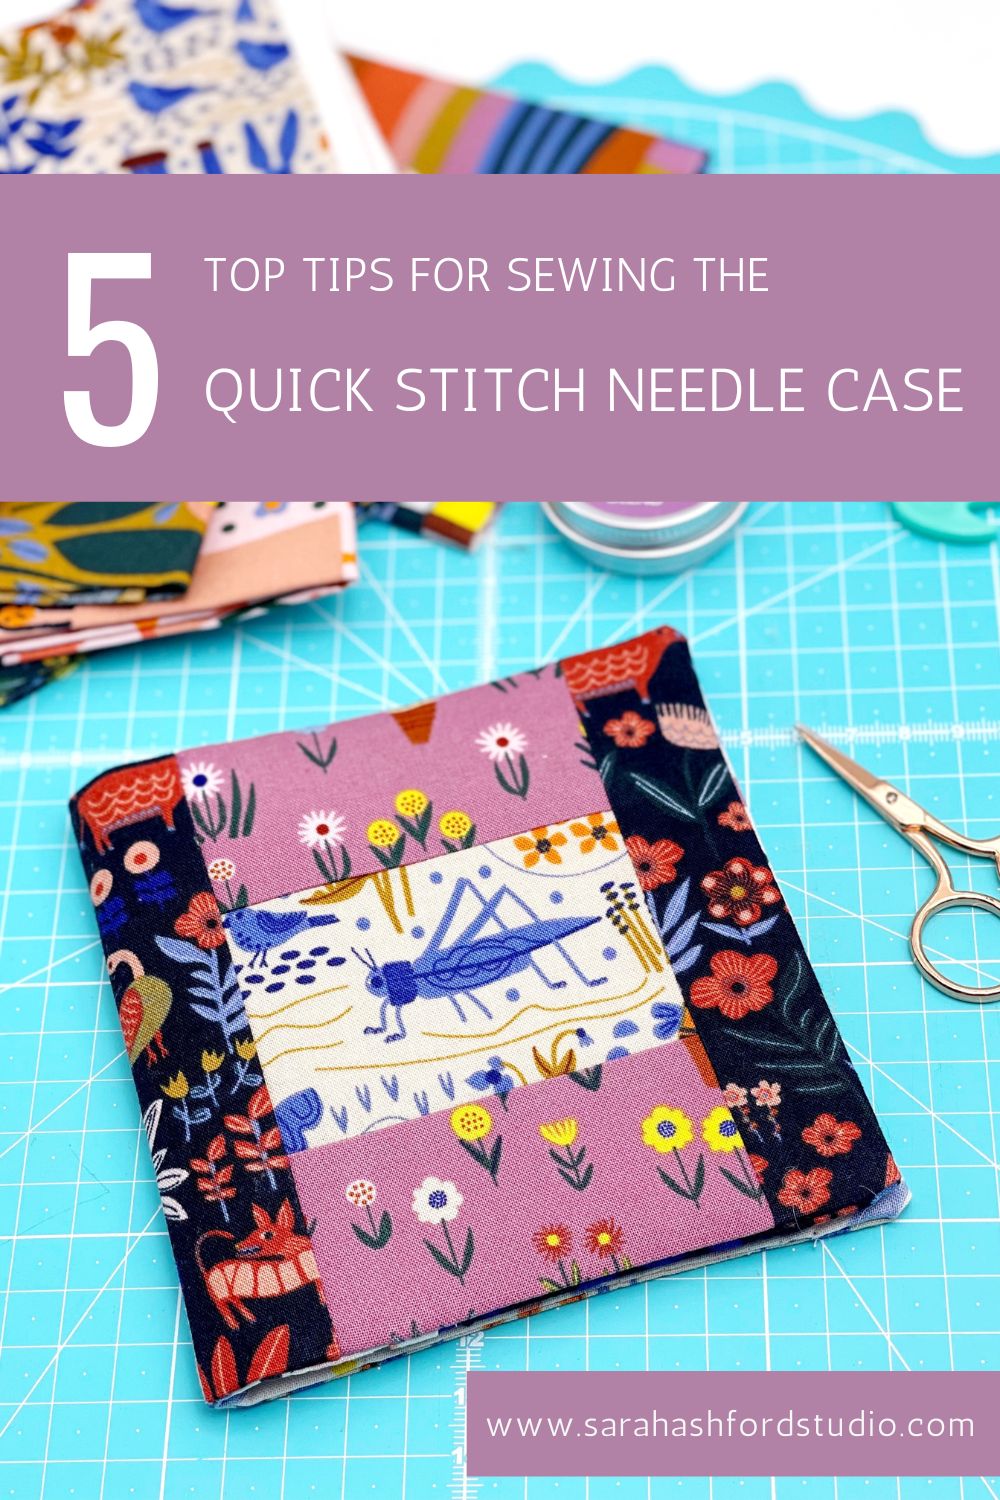 Open needle case on a cutting mat, containing thread, needles, pins and embroidery scissors.  